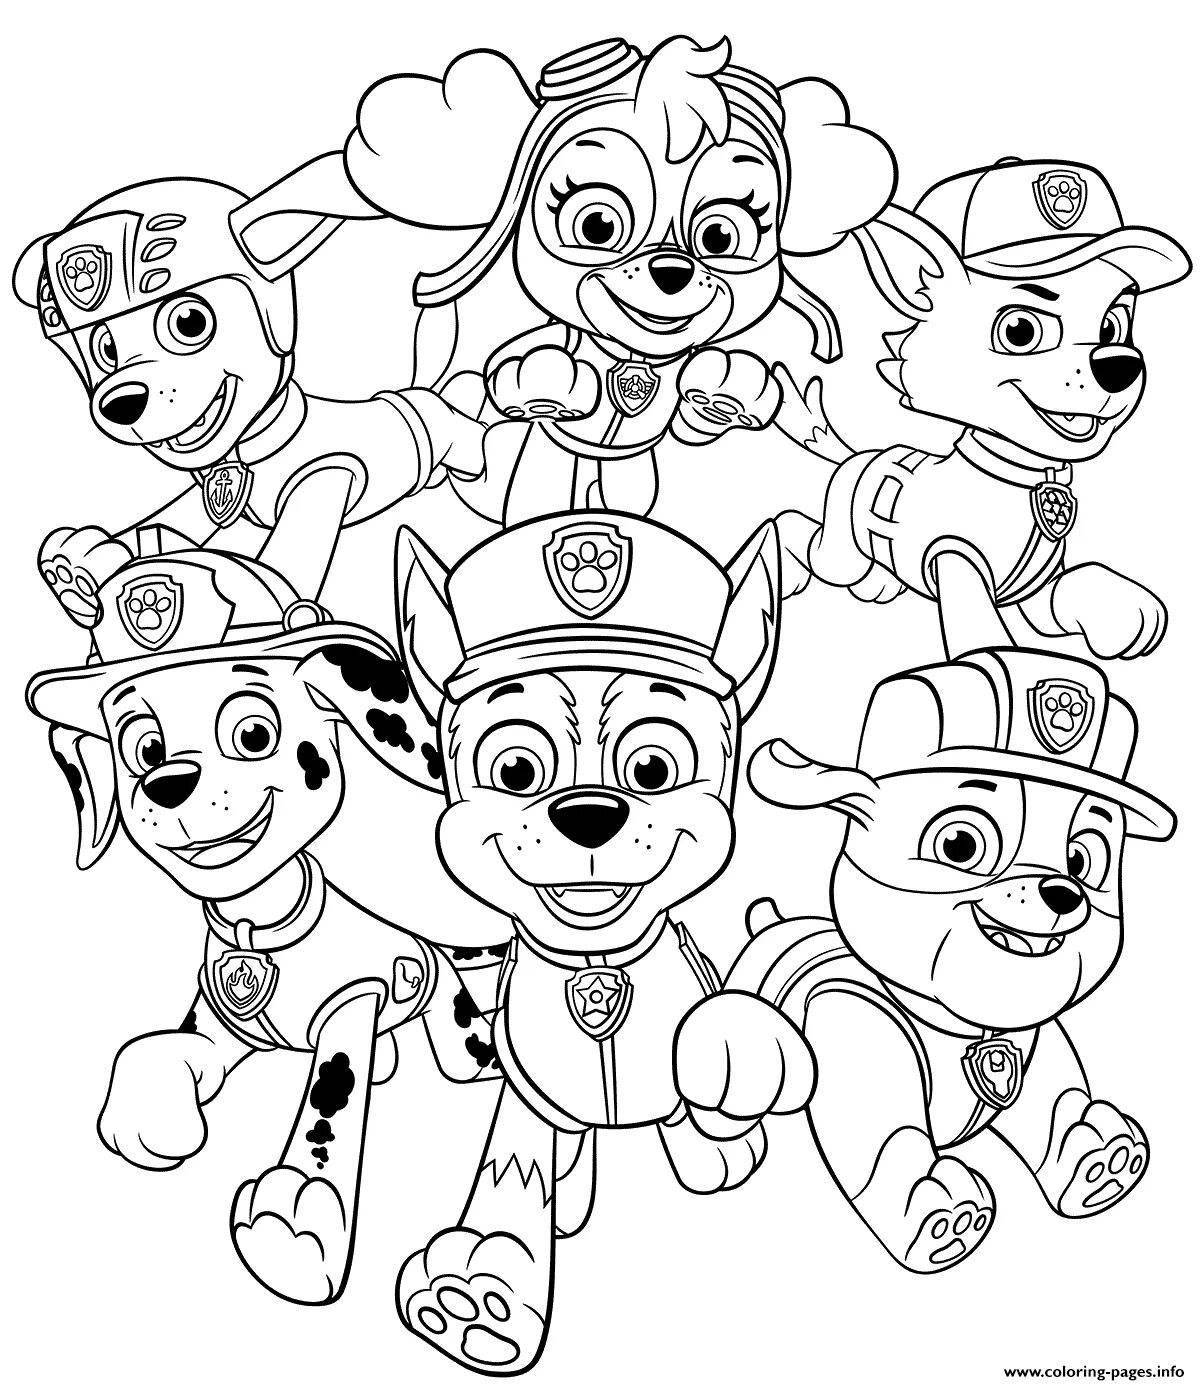 Live Paw Patrol coloring pages for boys